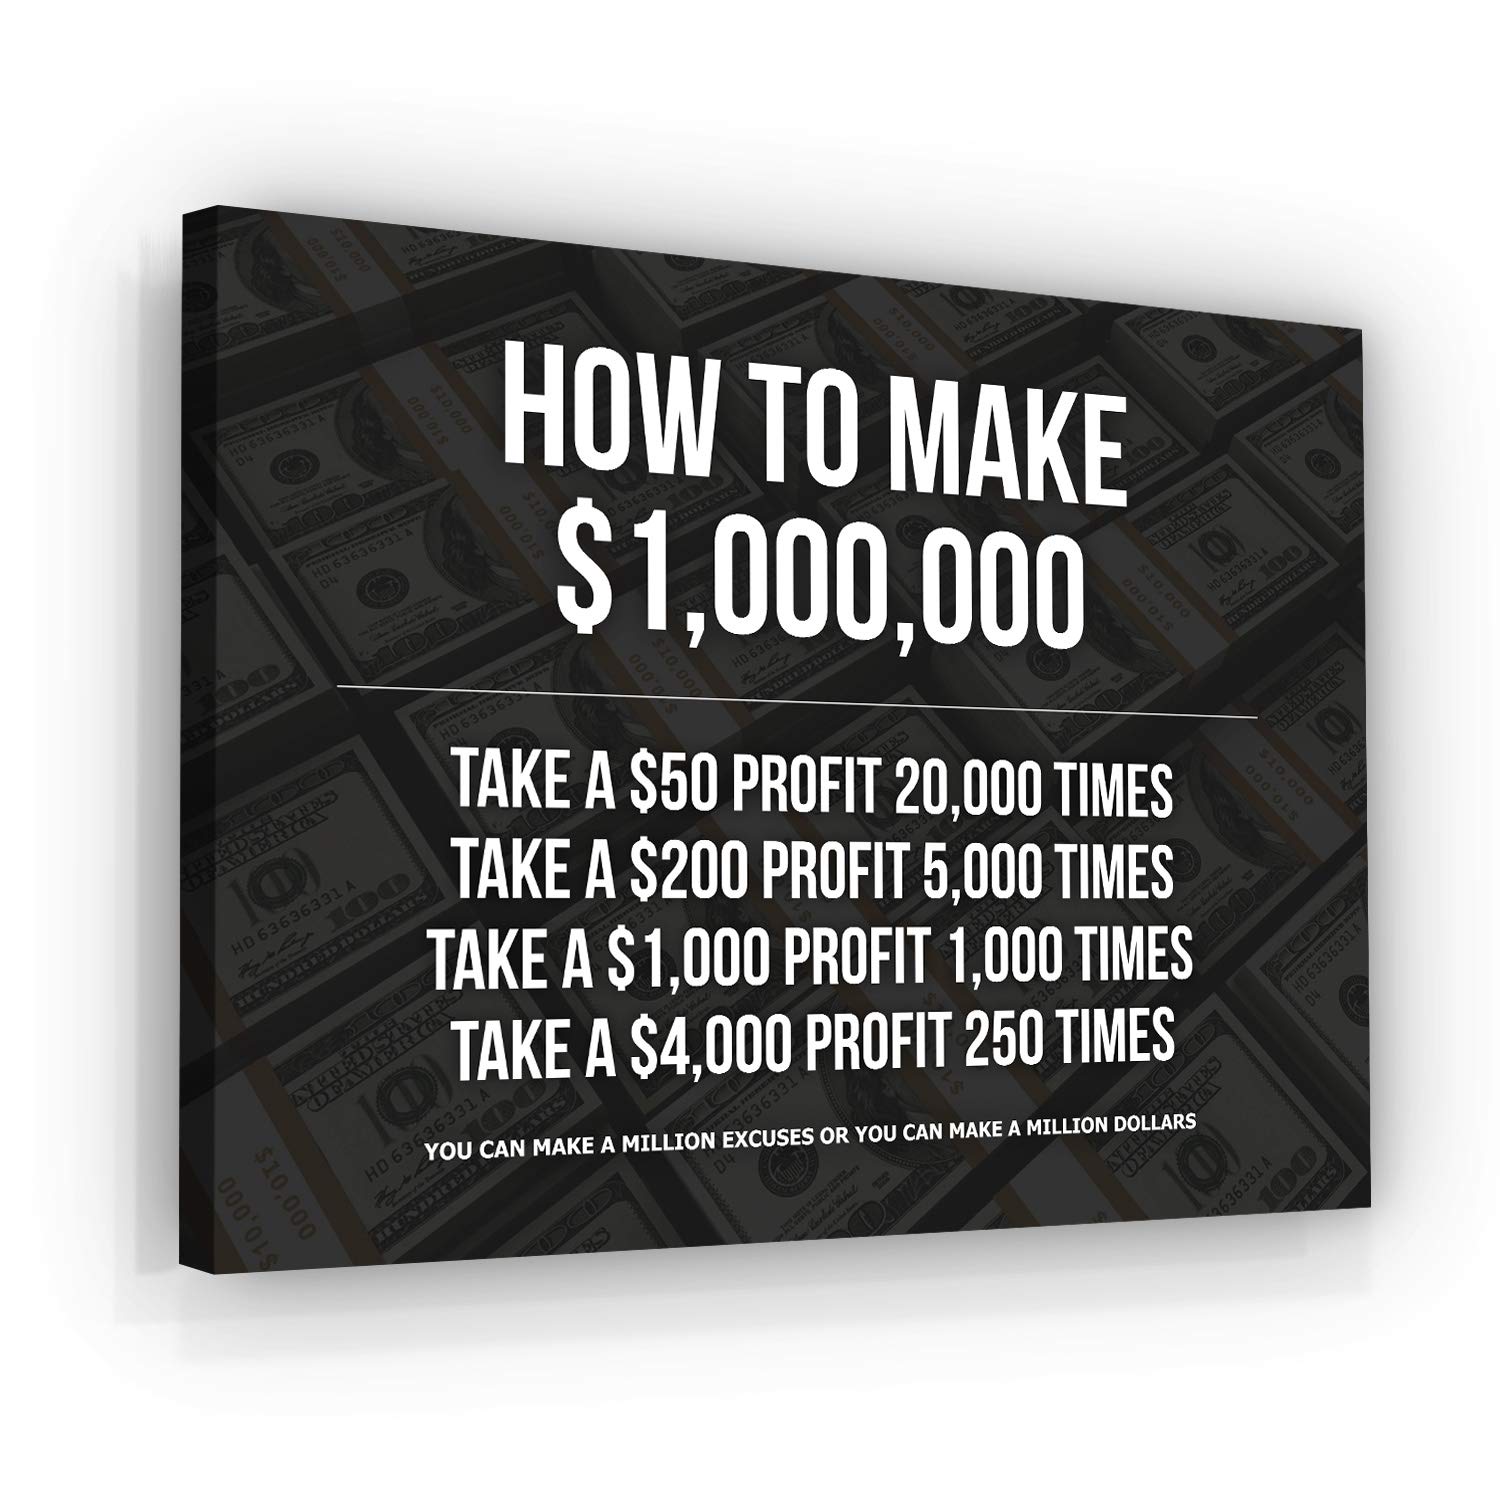 SuccessHunters How To Make 1,000,000 Dollars Motivational Quote Canvas Print Office Decor Wall Art Inspirational Sign Entrepreneur Money Artwork Saying (12" x 18")